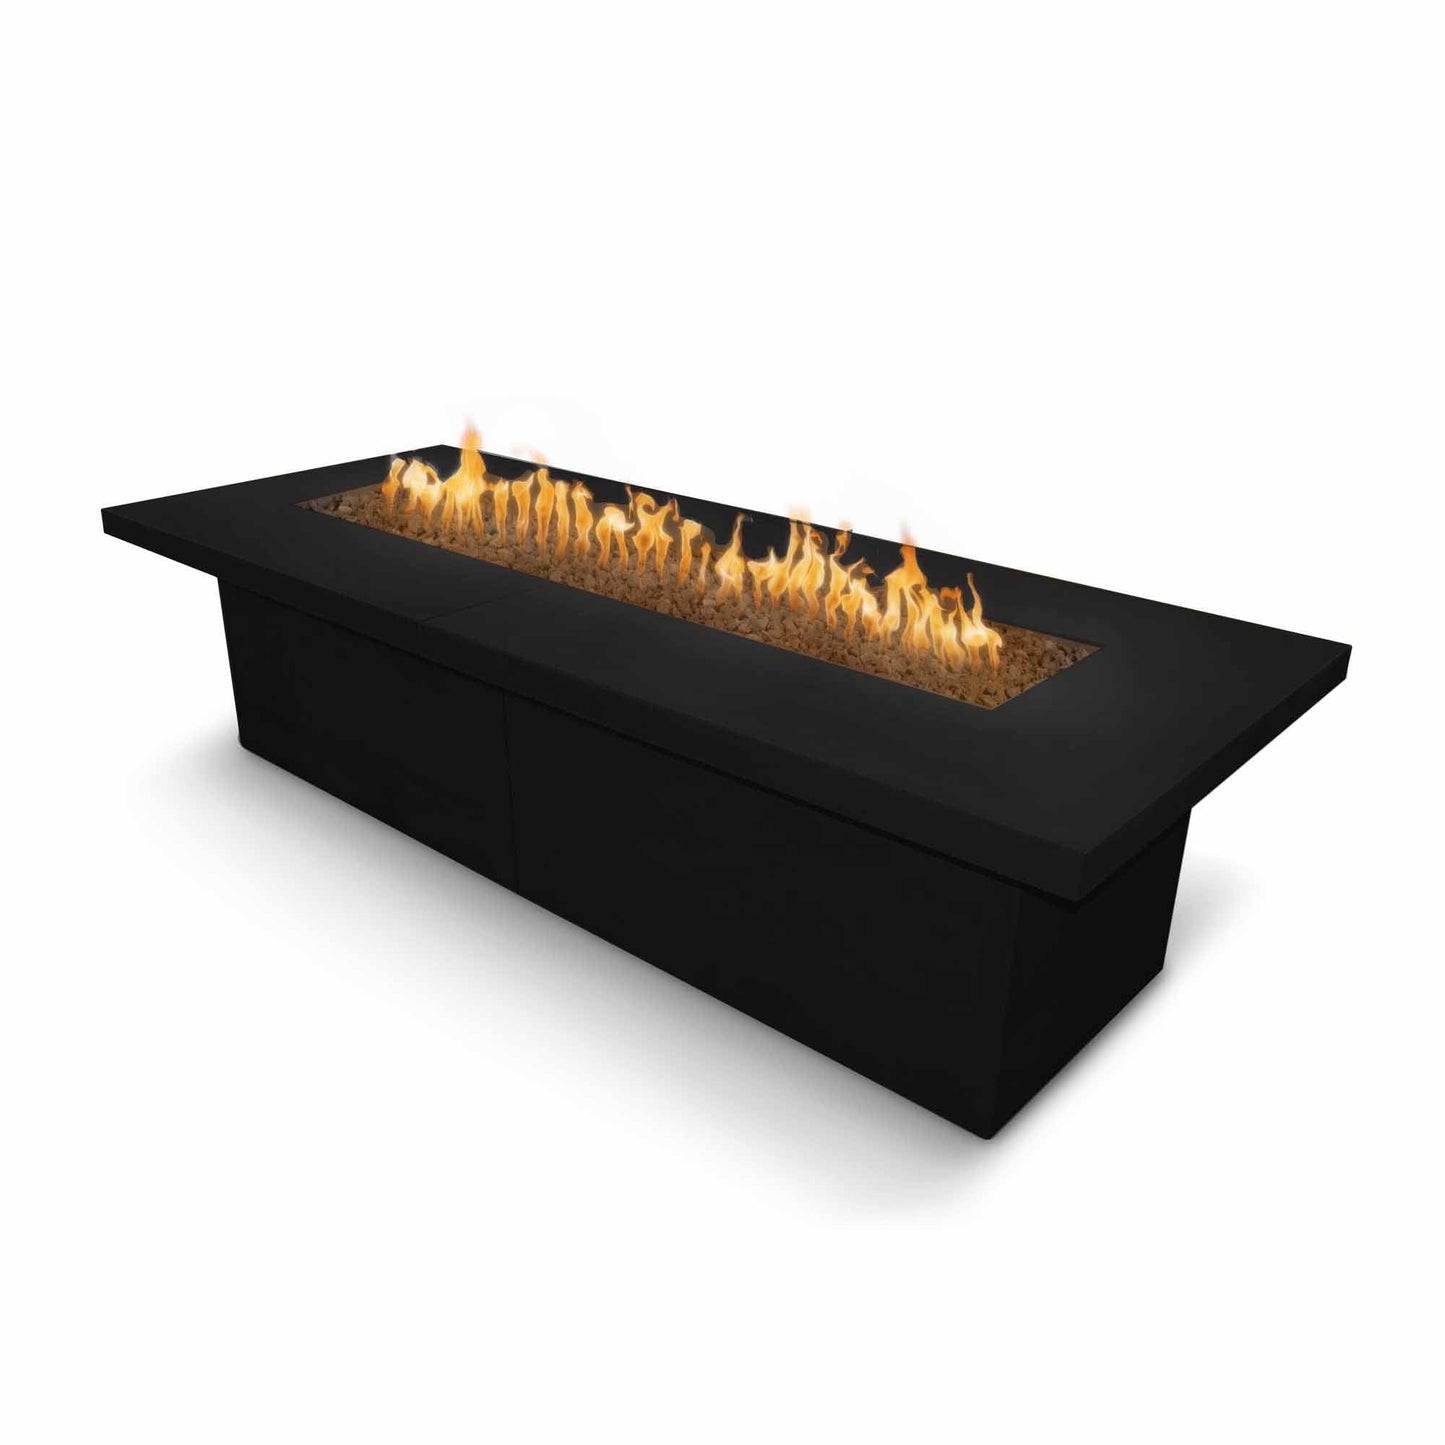 The Outdoor Plus Rectangular Newport 144" White Powder Coated Metal Liquid Propane Fire Pit with Flame Sense with Spark Ignition